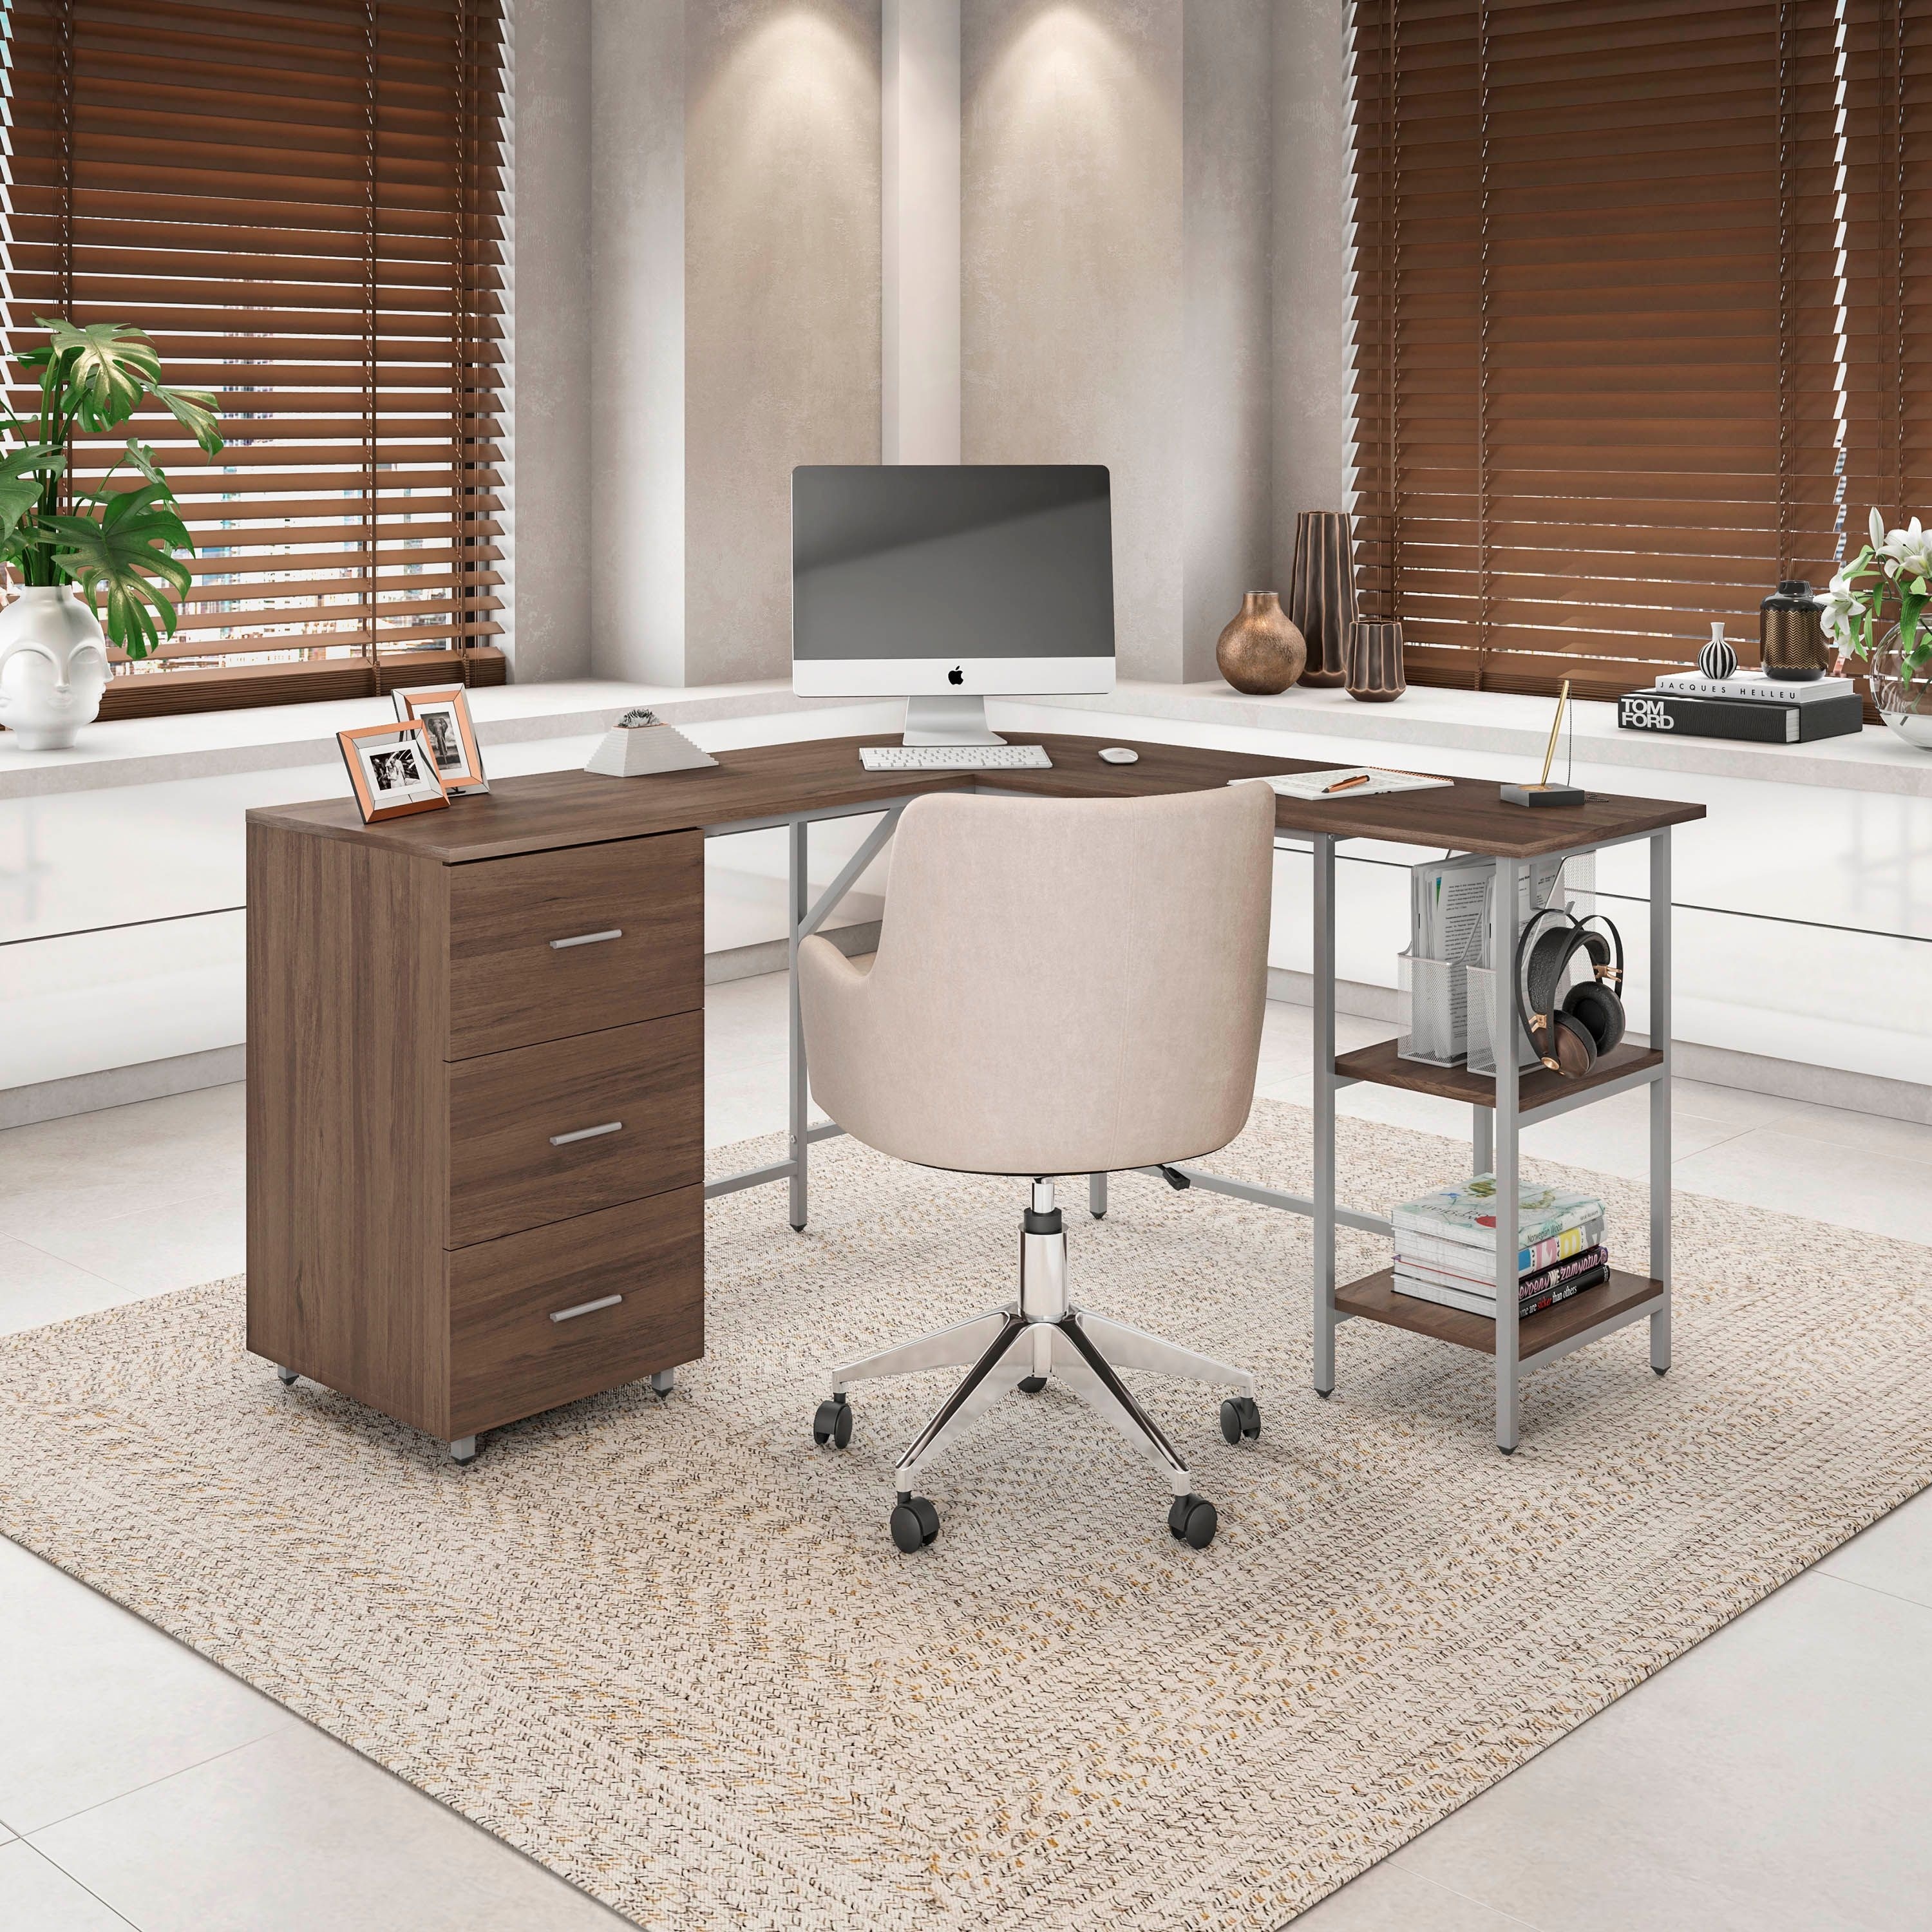 https://ak1.ostkcdn.com/images/products/is/images/direct/edd3e06c332d37a2687f7bd1540516aec61bbc1d/Modern-Designs-L-Shape-Home-Office-Desk-With-Storage%2C-Gold.jpg